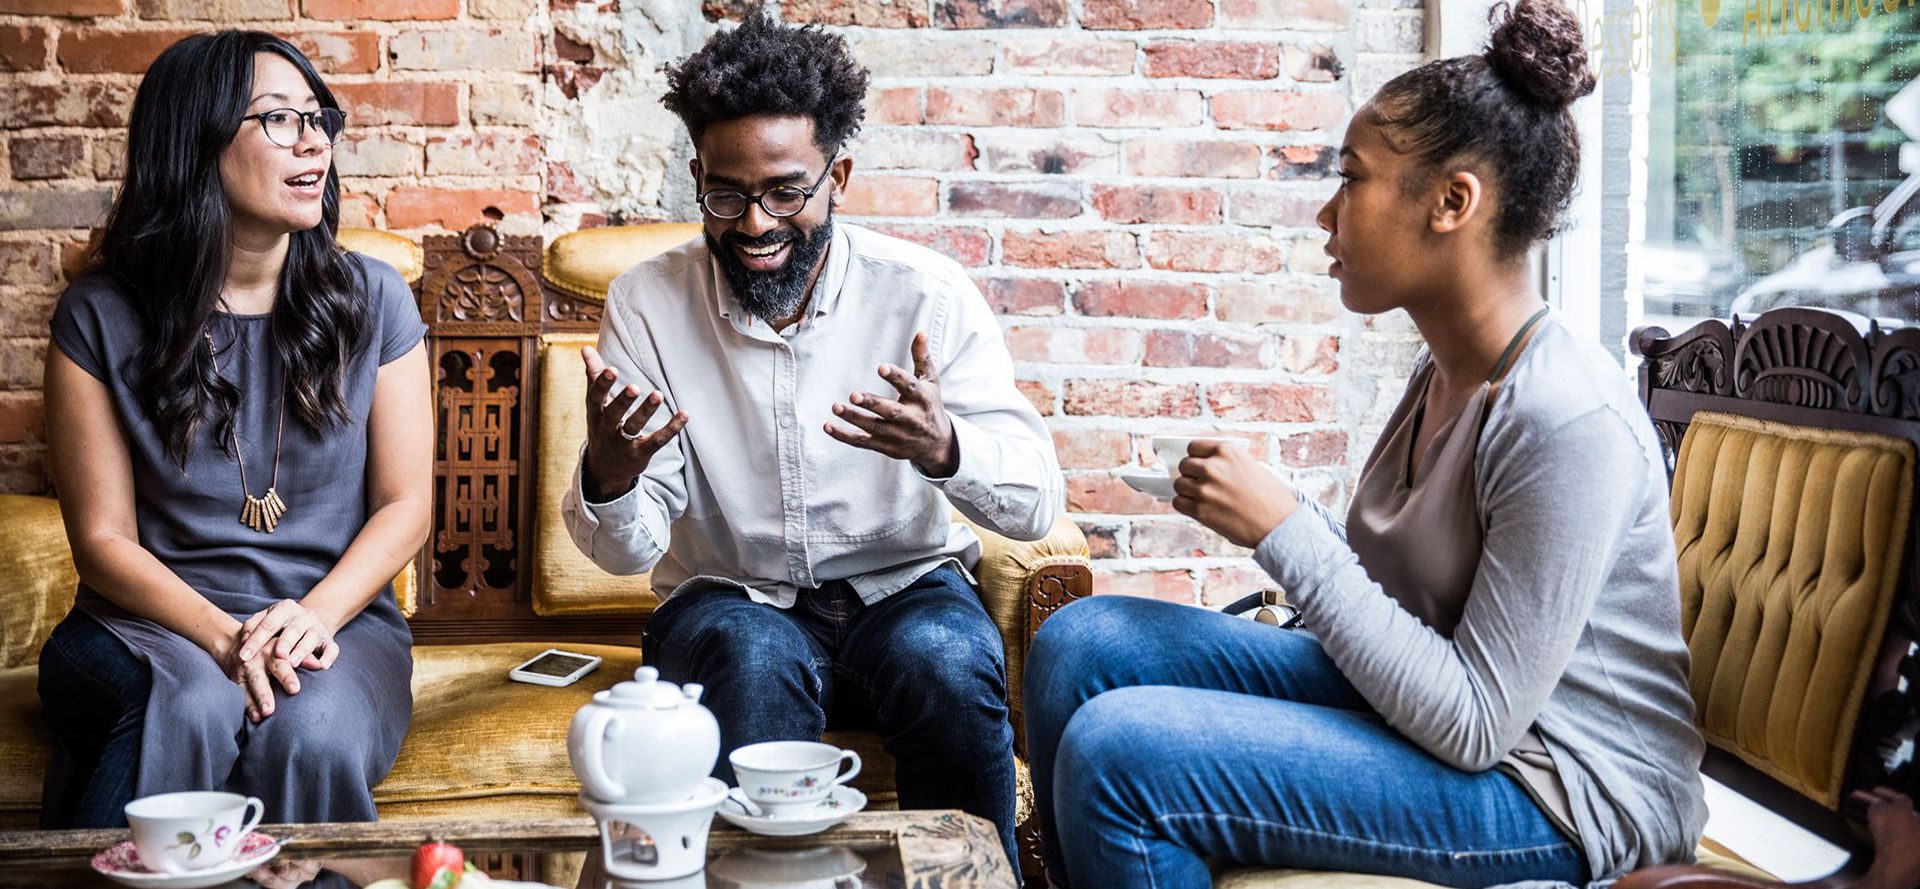 A guy and two girls talking over a cup of tea.